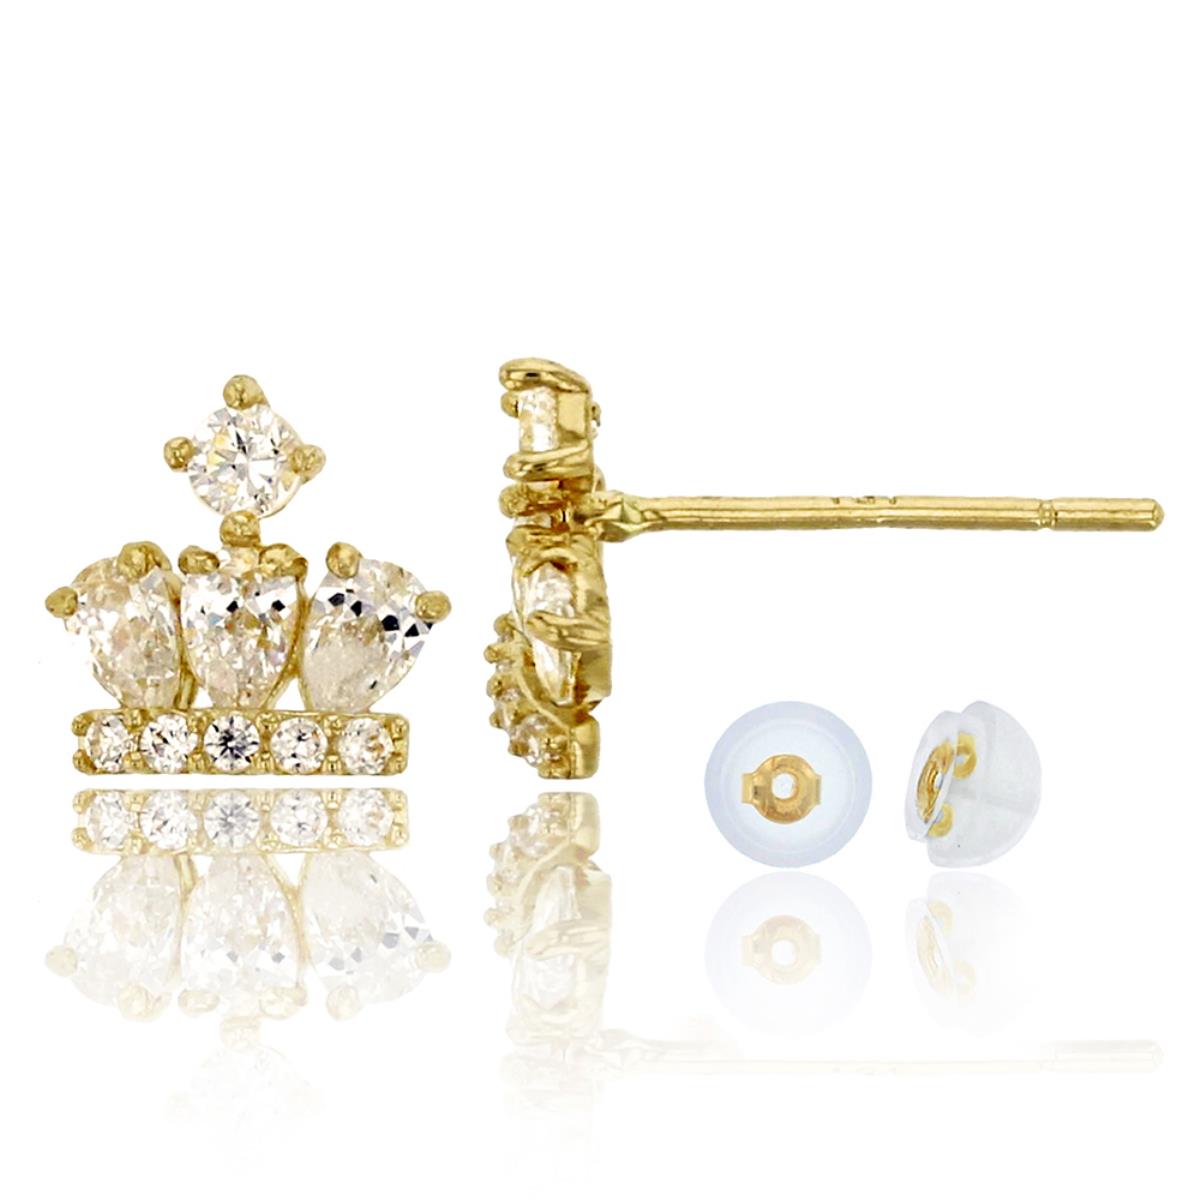 10K Yellow Gold Micropave Crown CZ Stud Earrings with Bubble Silicone Backs